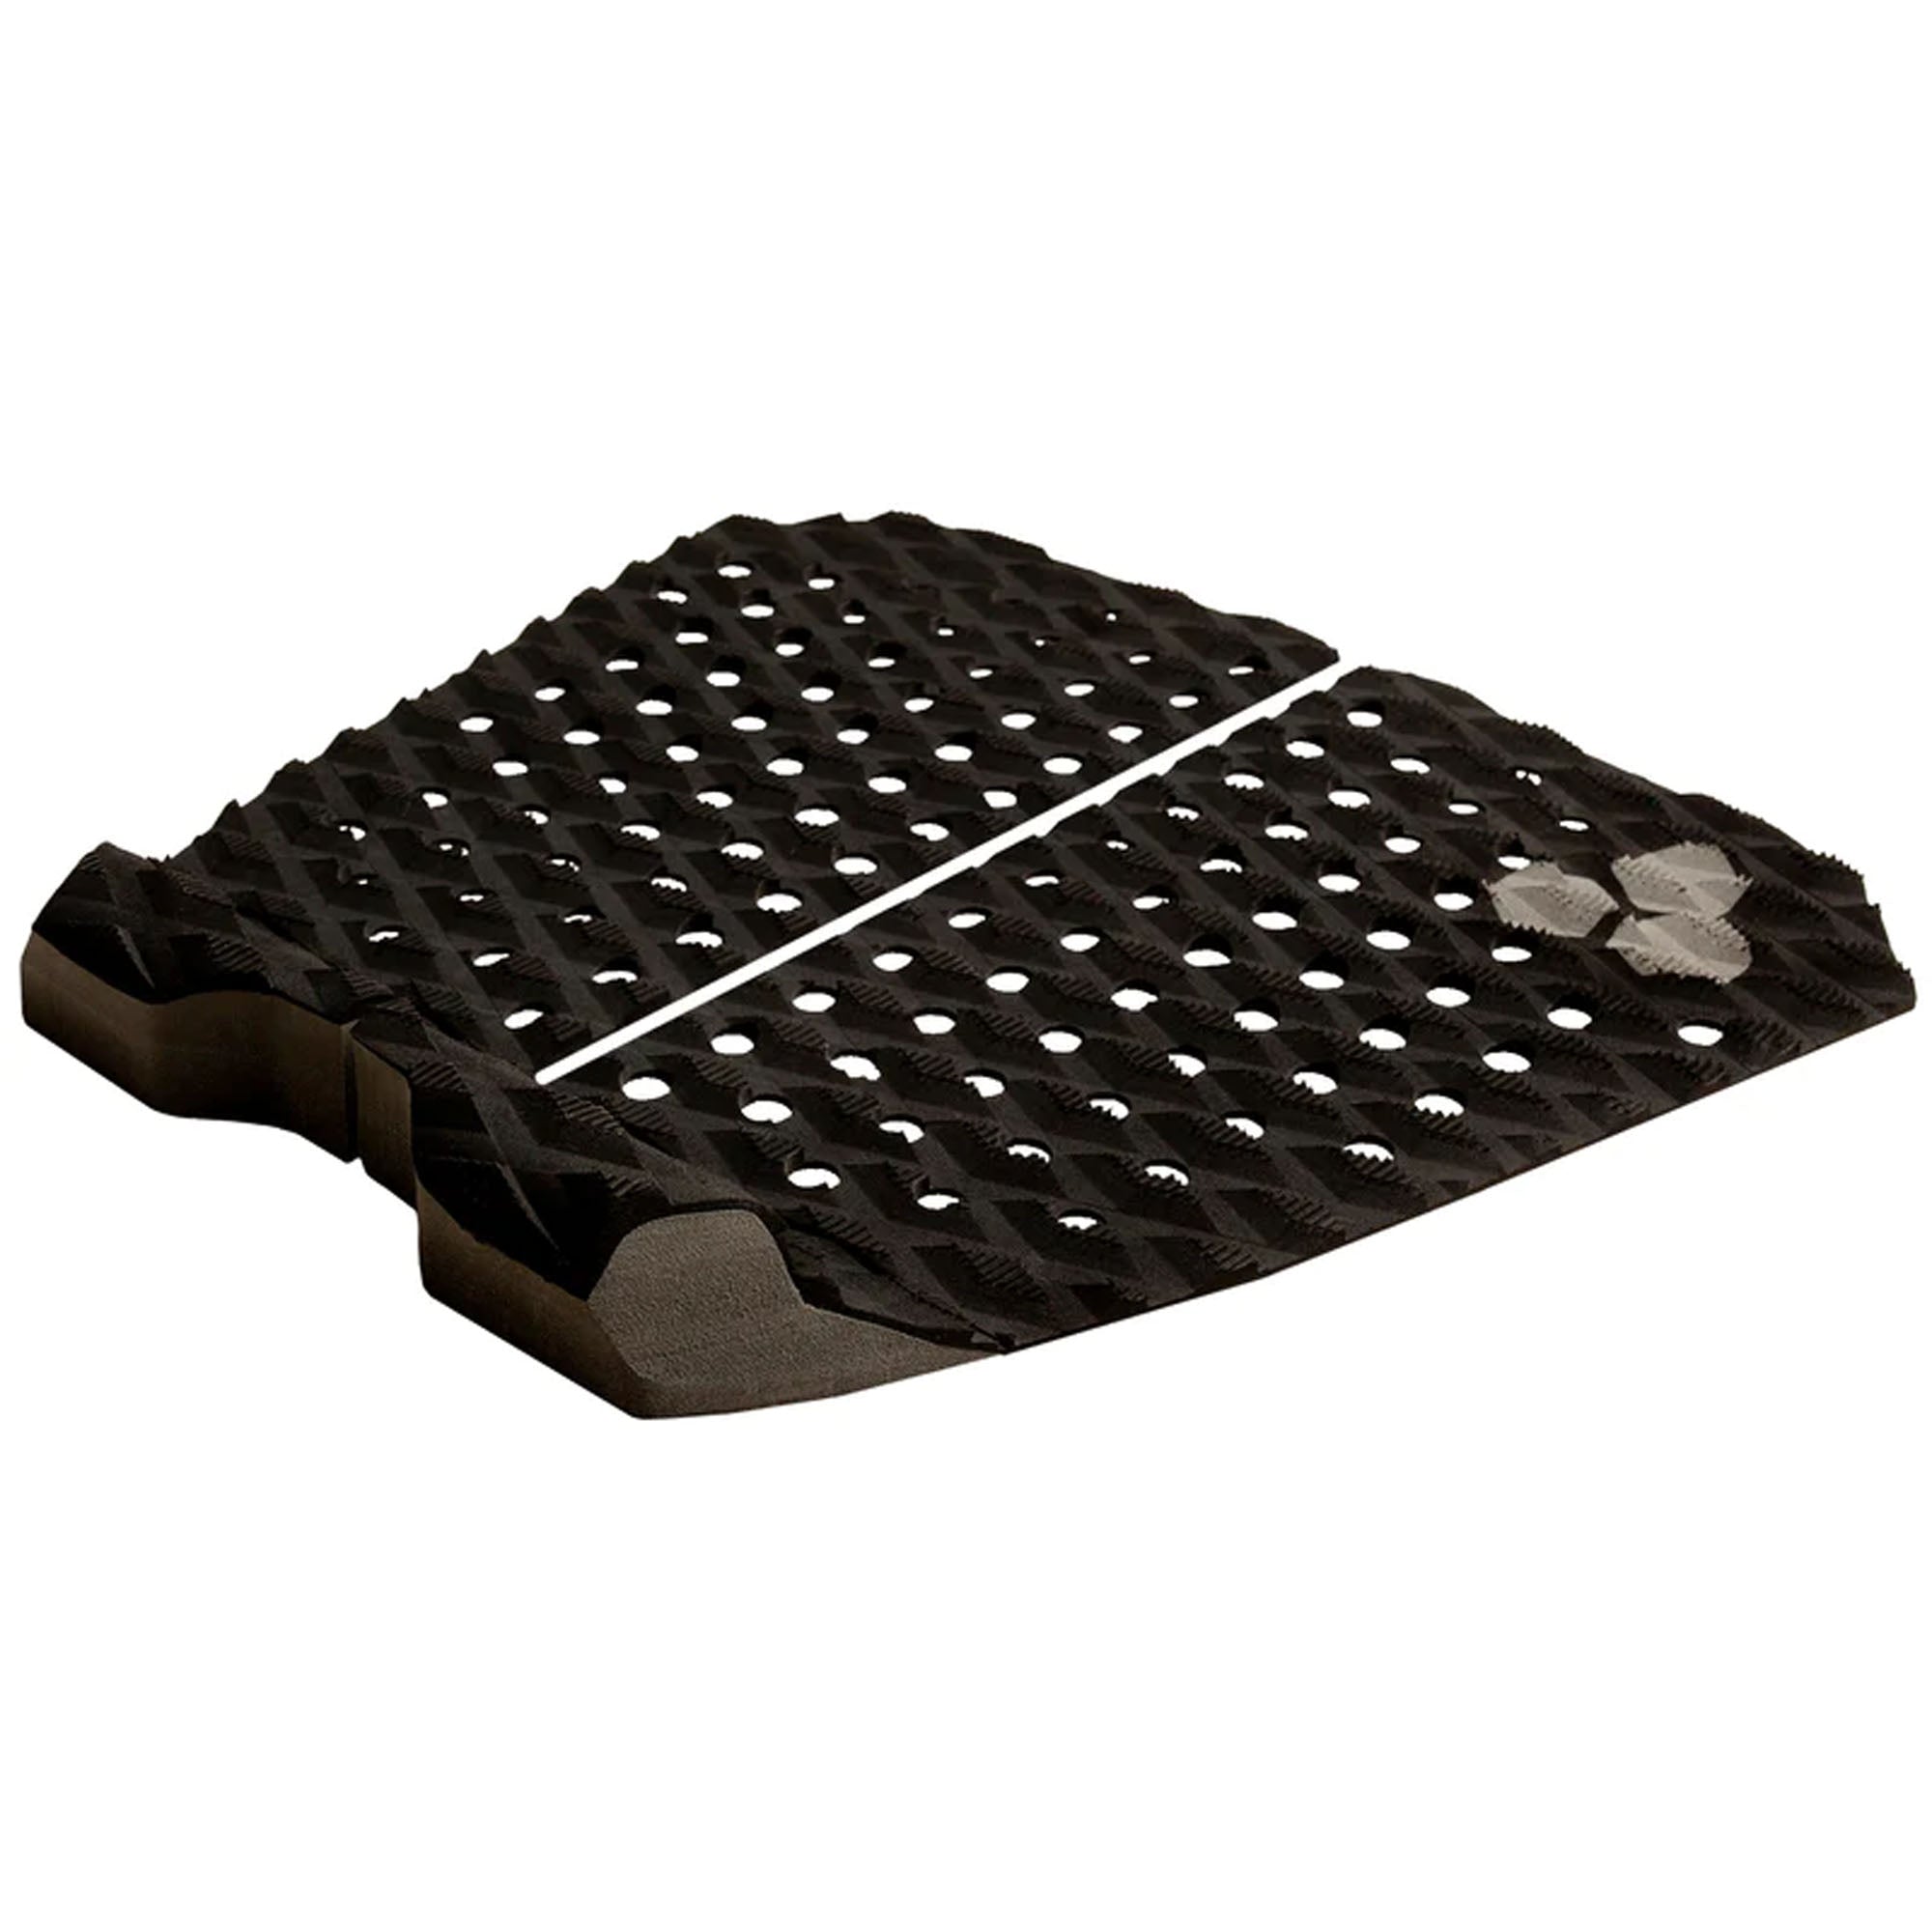 Channel Islands Factor XL Flat Traction Pad